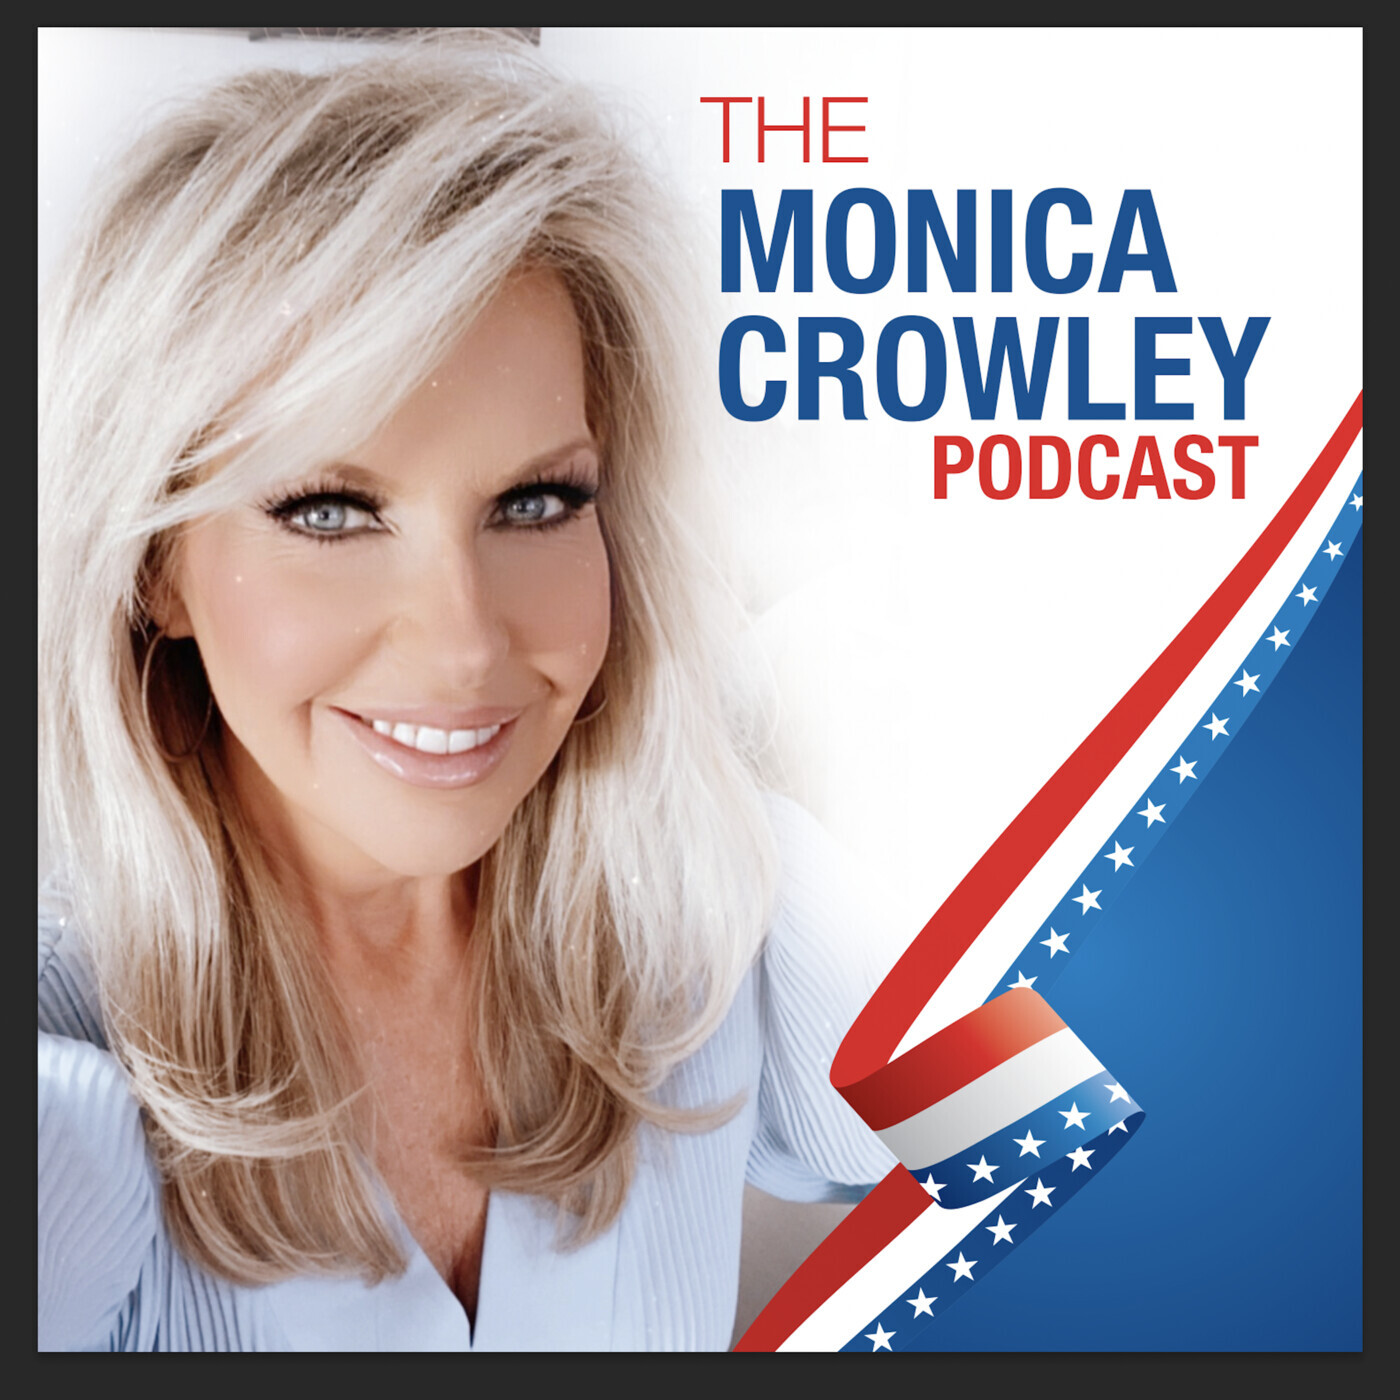 Monica’s Midterm Update - and the State of Our Country with Guest Mike Pompeo